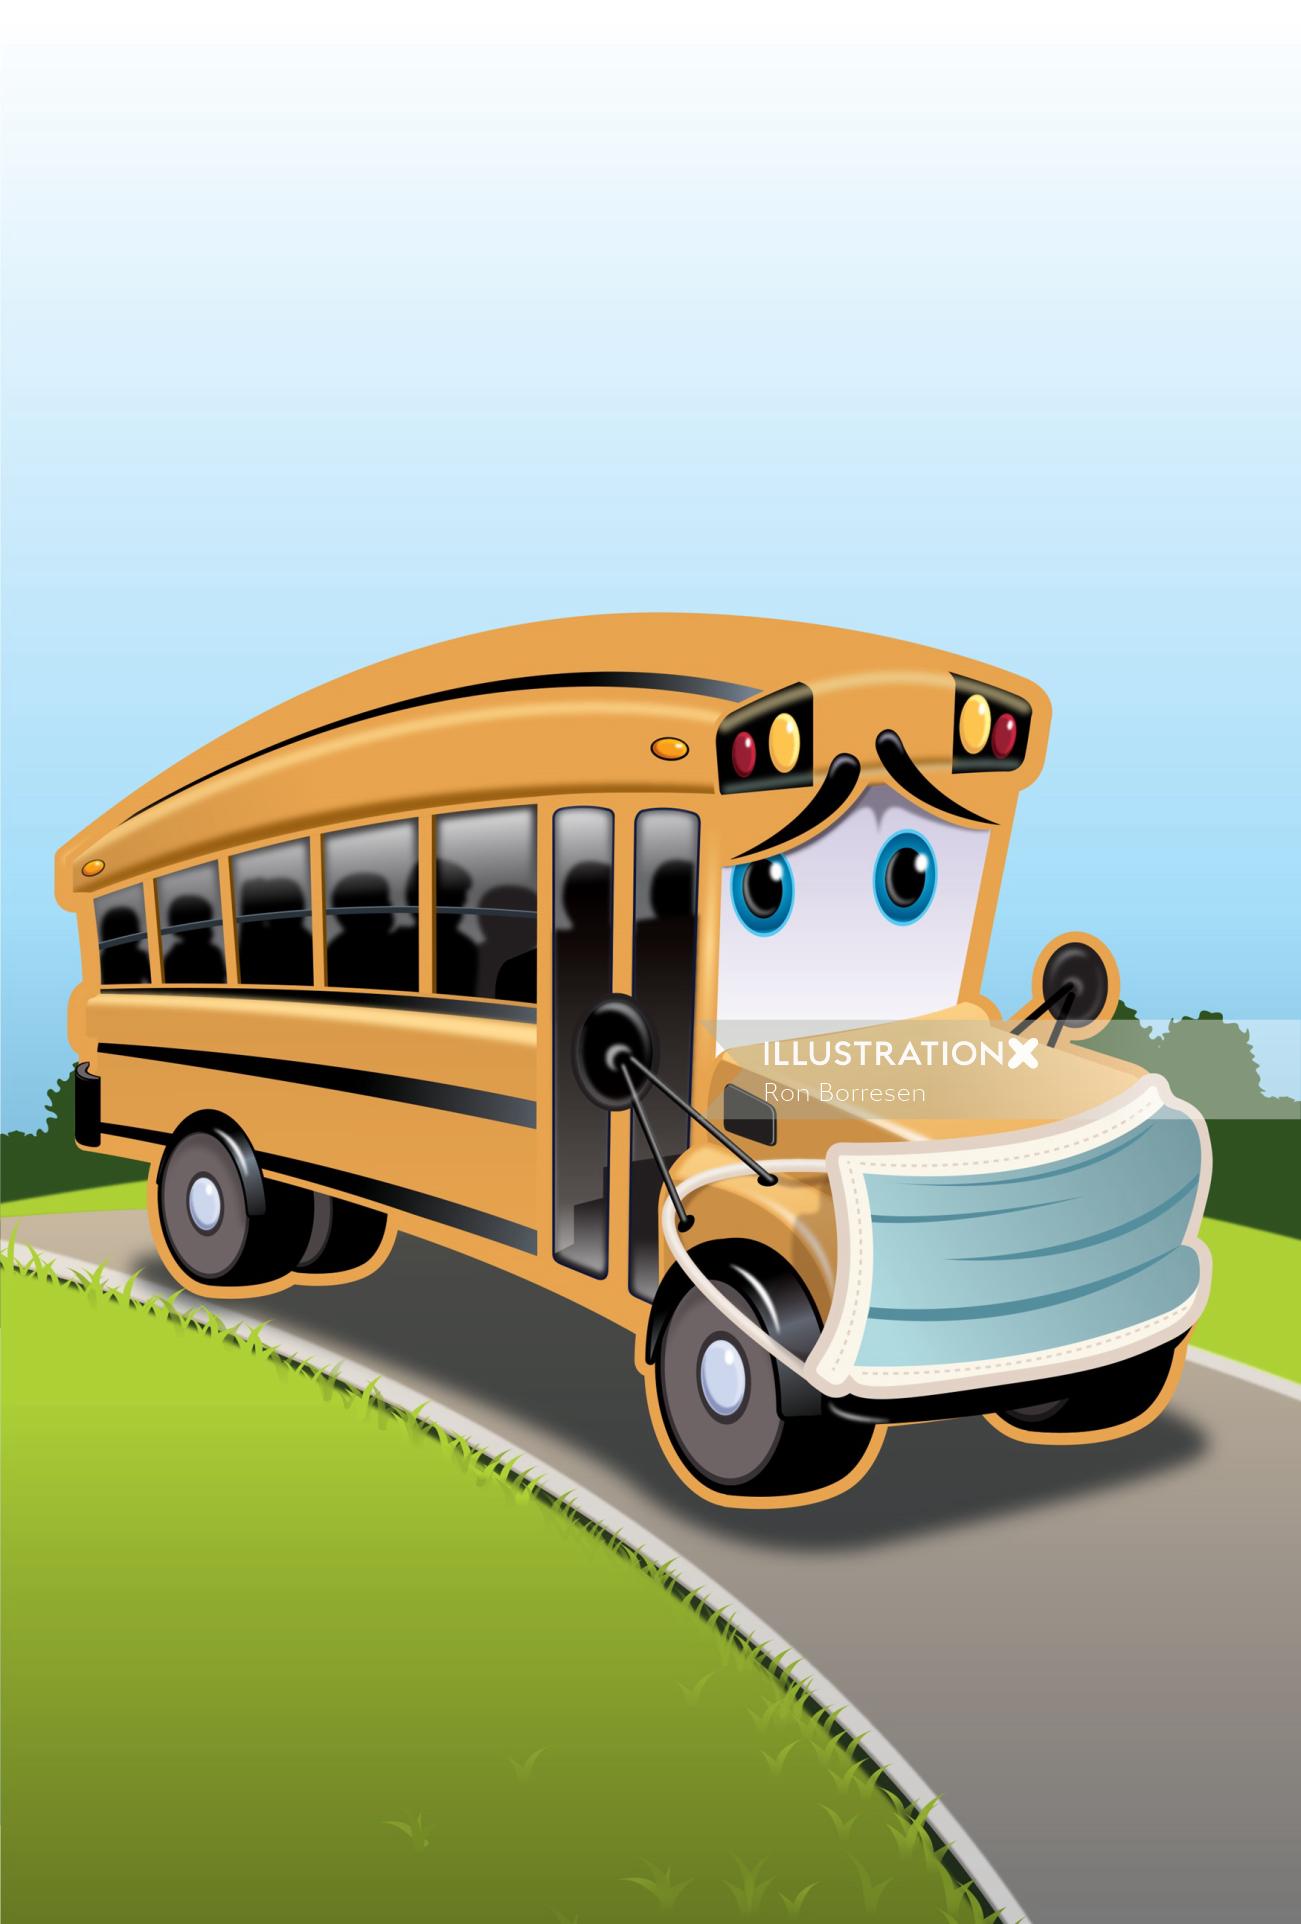 Character design of bus with sad face
